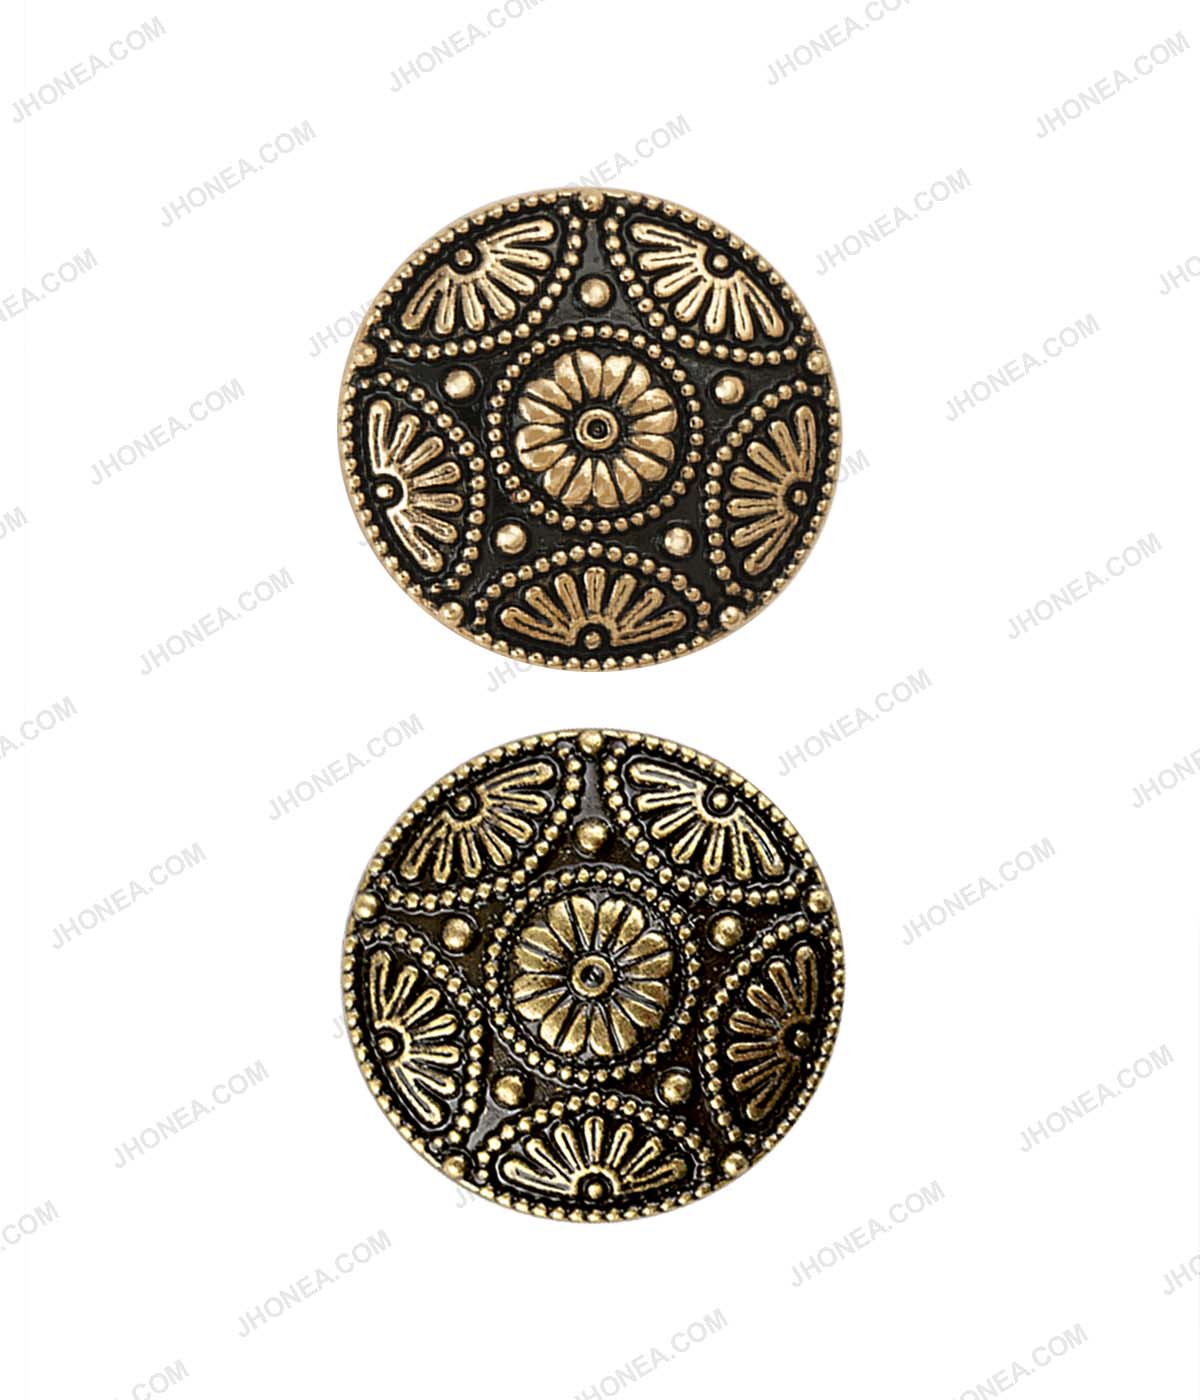 Antique Brass & Antique Gold Intricate Floral Design Ethnic Buttons